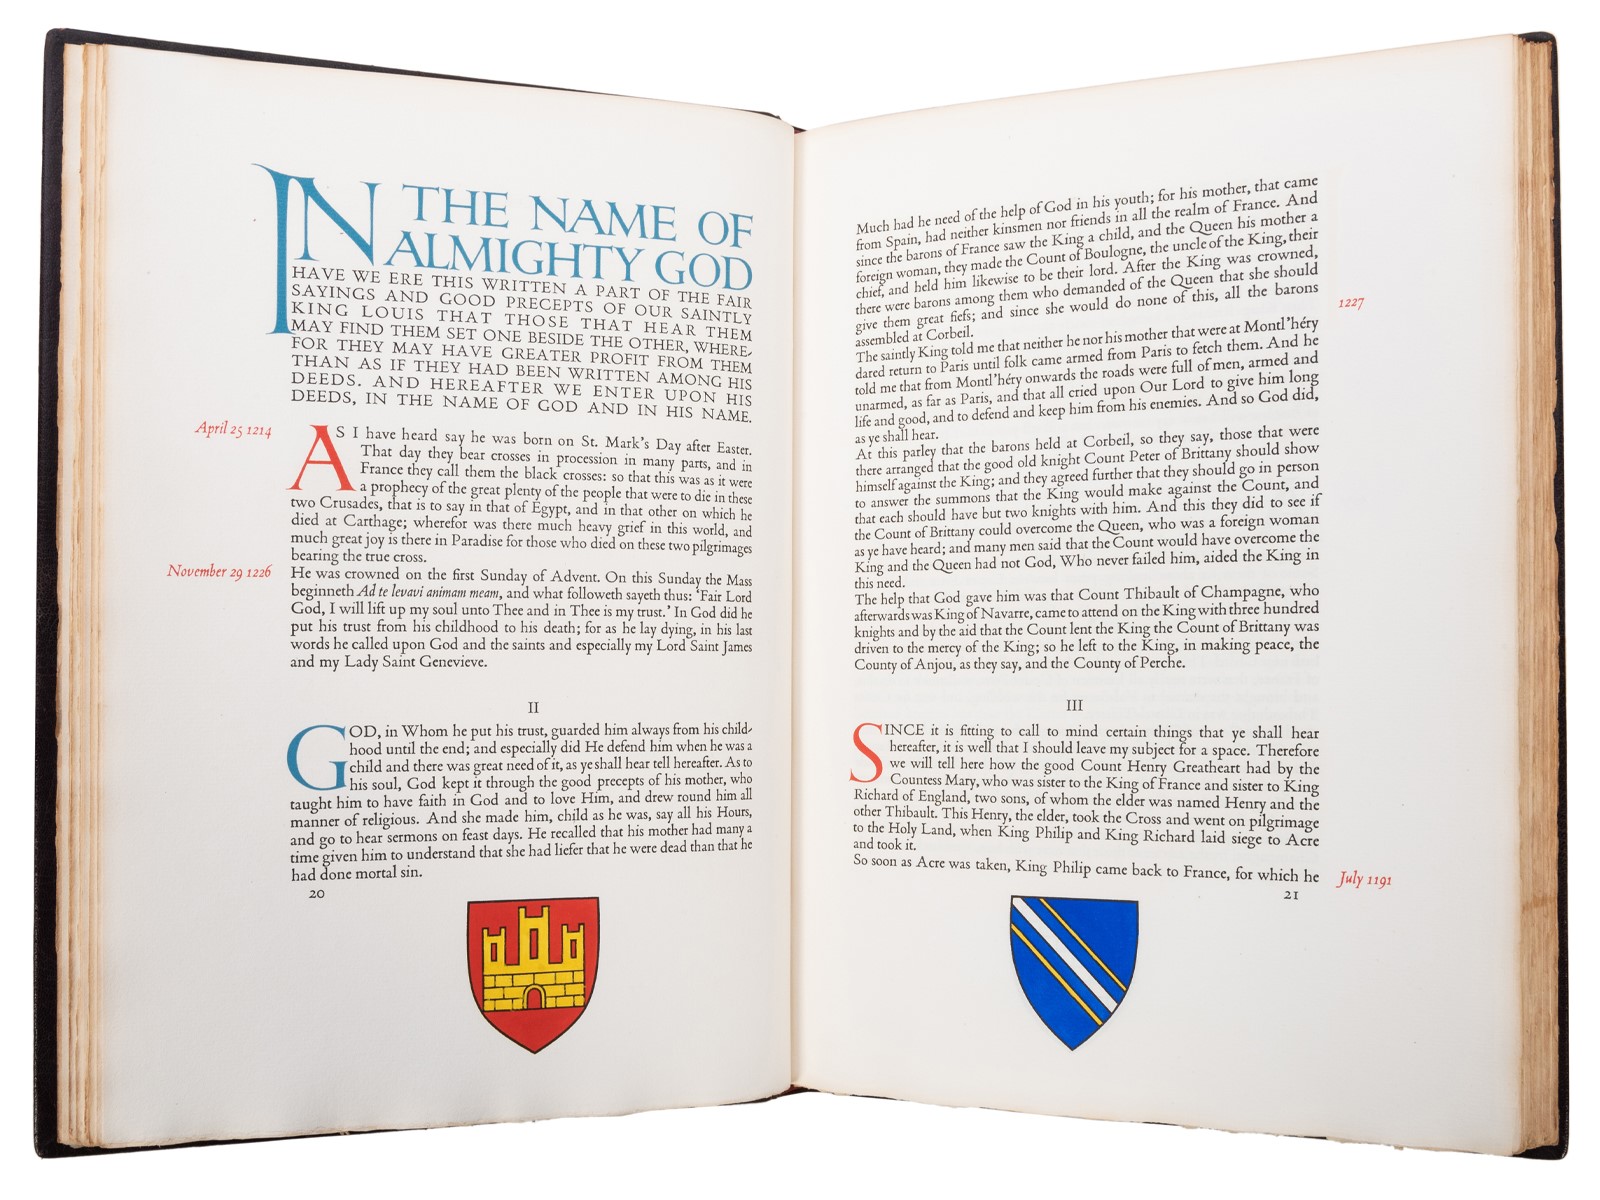 Lord John Joinville's The History of Saint Louis from the Gregynog Press